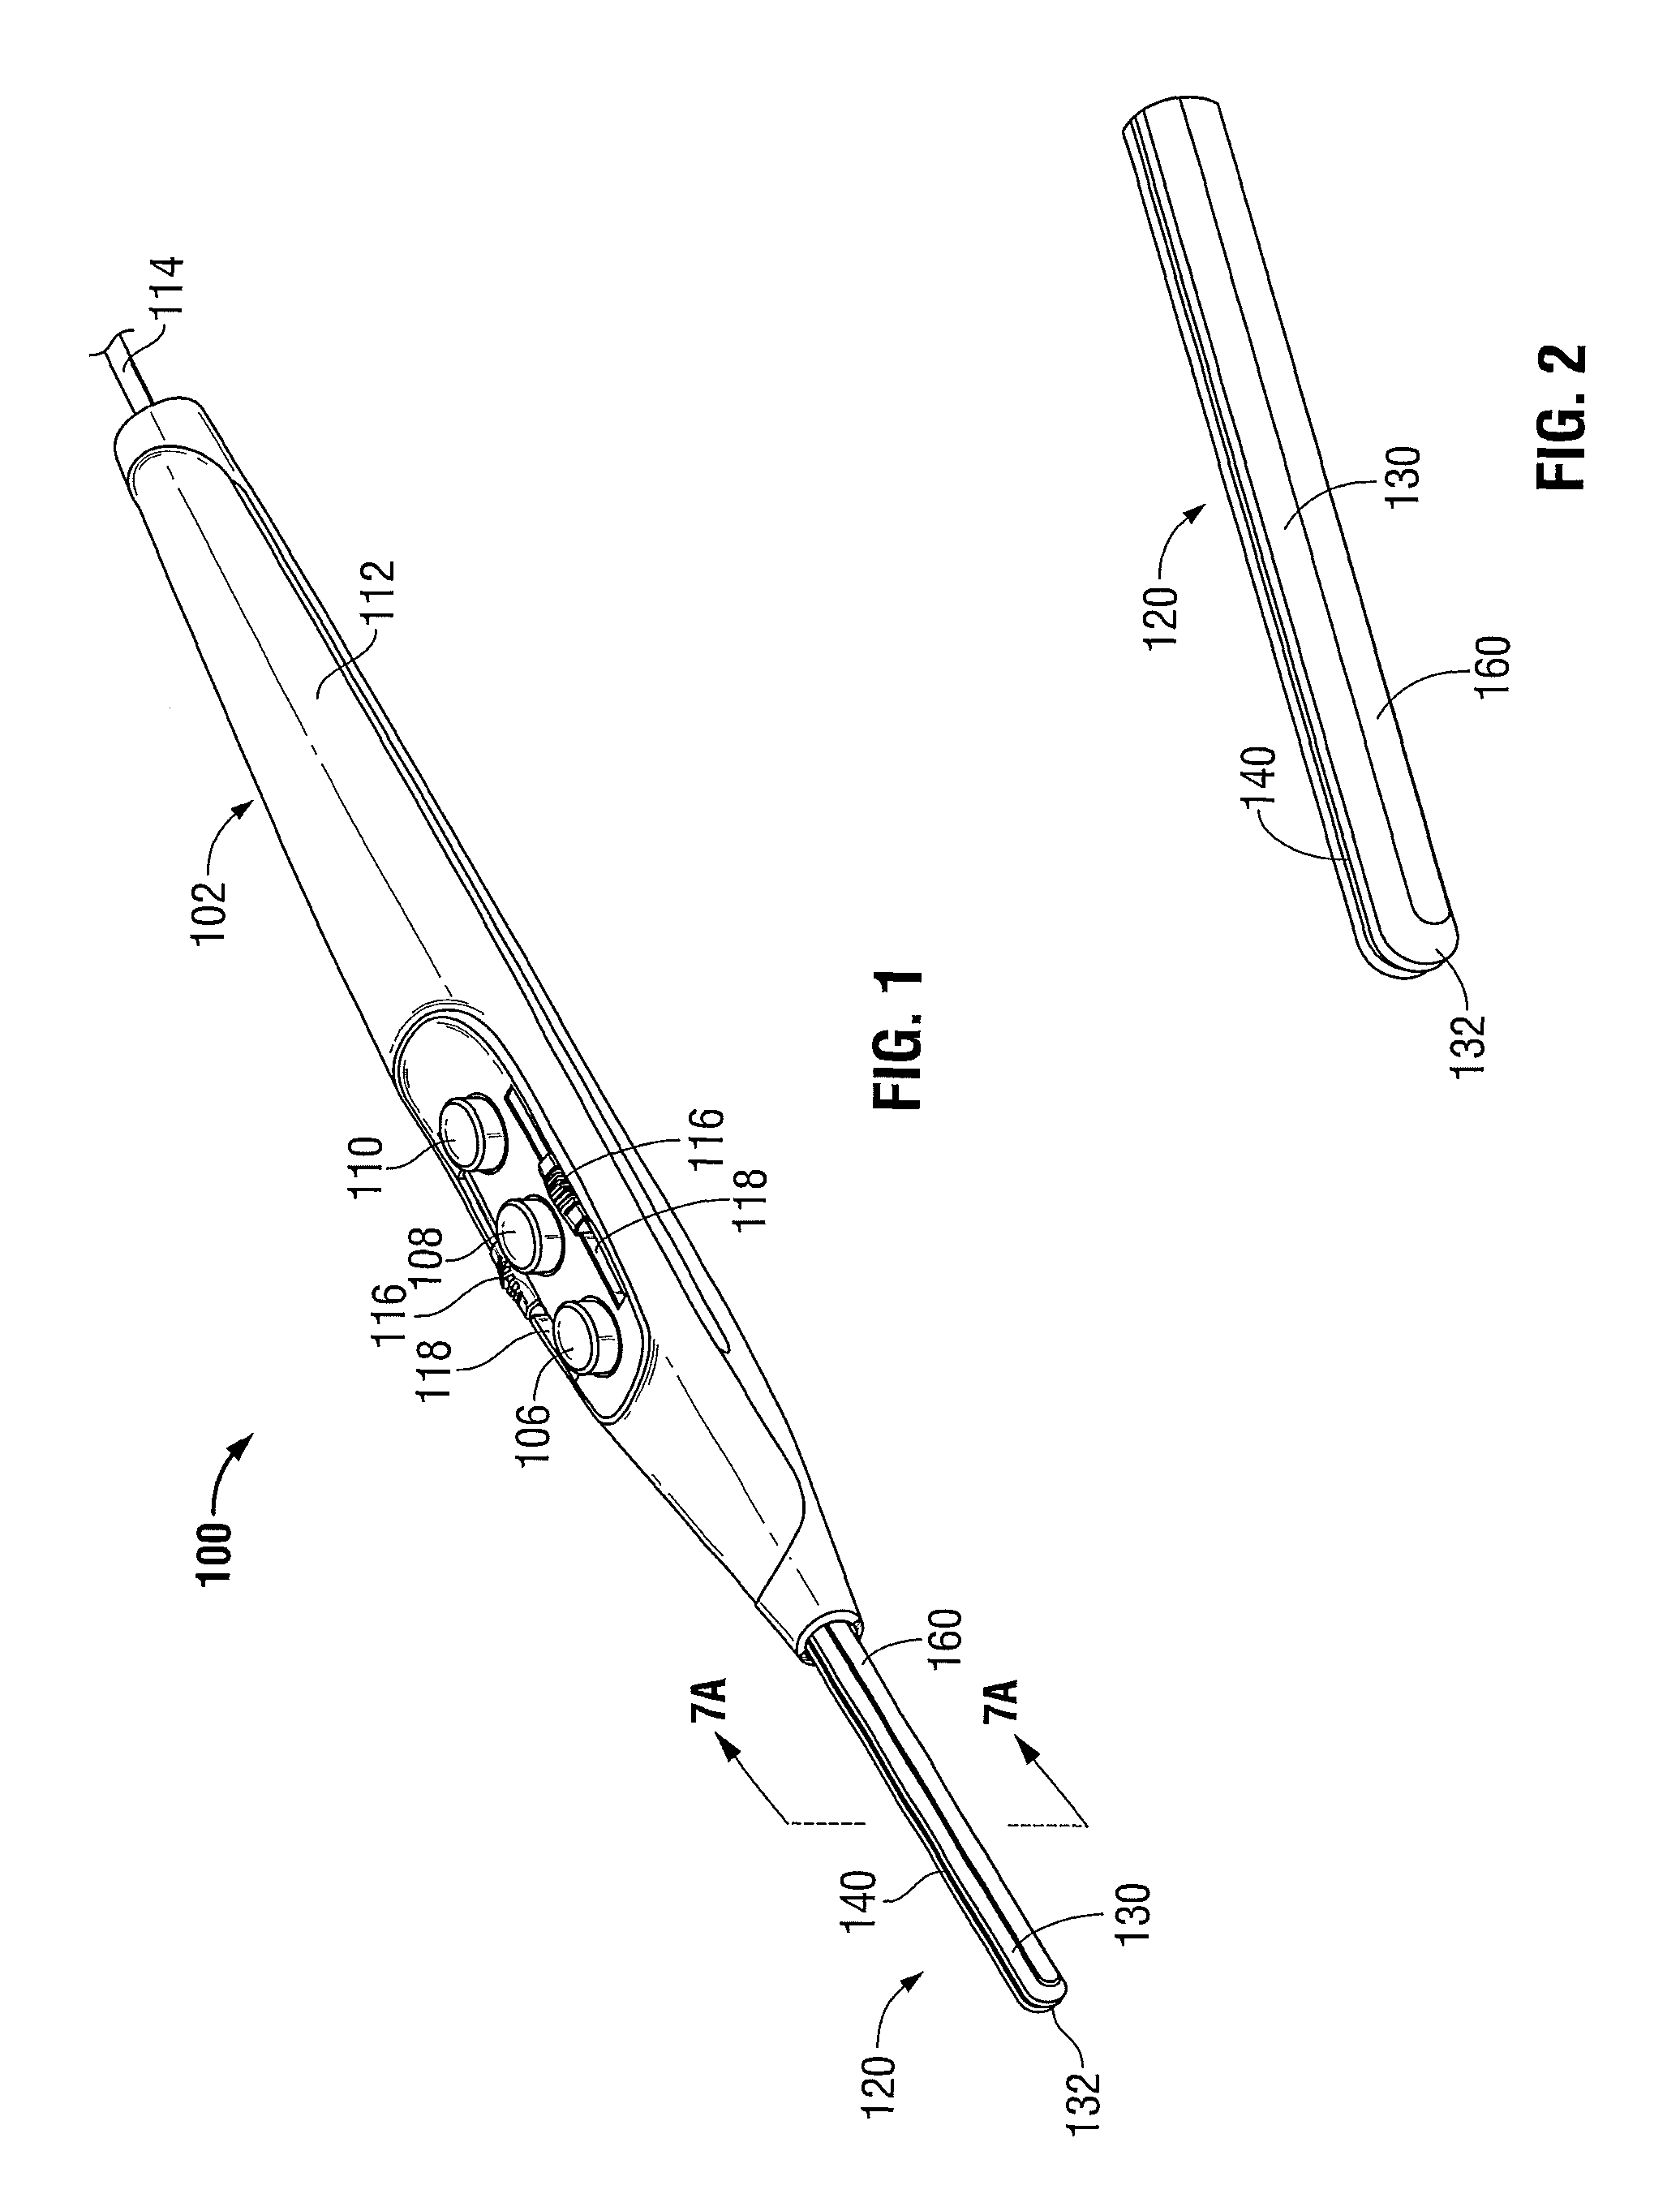 Methods of manufacturing end effectors for energy-based surgical instruments